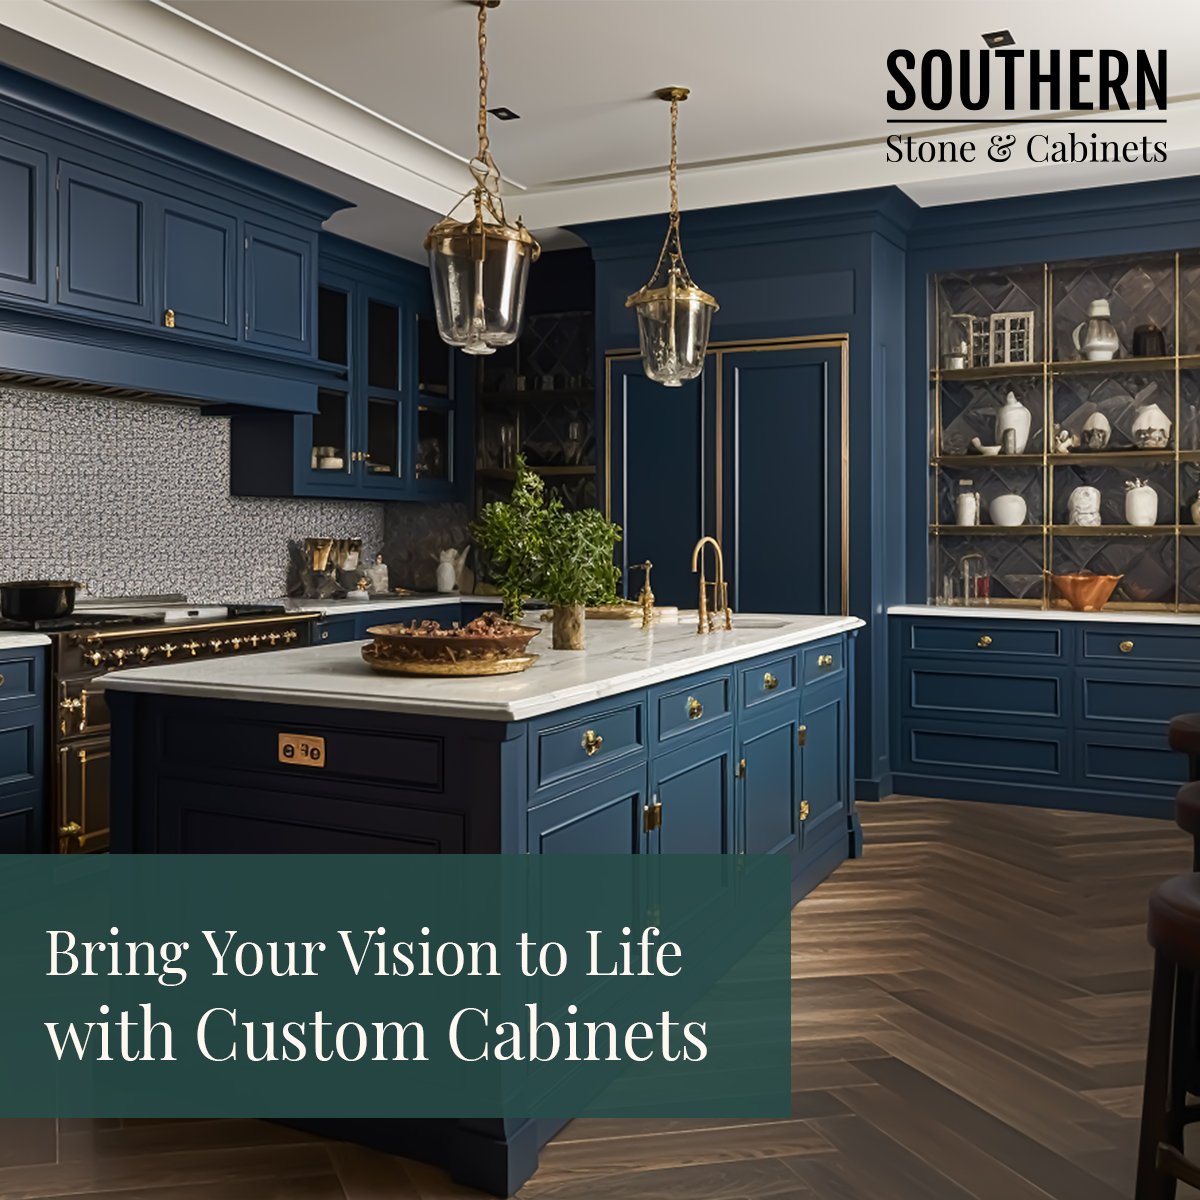 At Southern Stone & Cabinets, we specialize in crafting high-quality custom cabinets tailored to the unique needs of builders like you.

Call us today at 662-265-8132.

mysouthernstone.com/cabinets-memph…

#southernstone #modernhomedesign #dreamkitchen #cabinets #customcabinetry